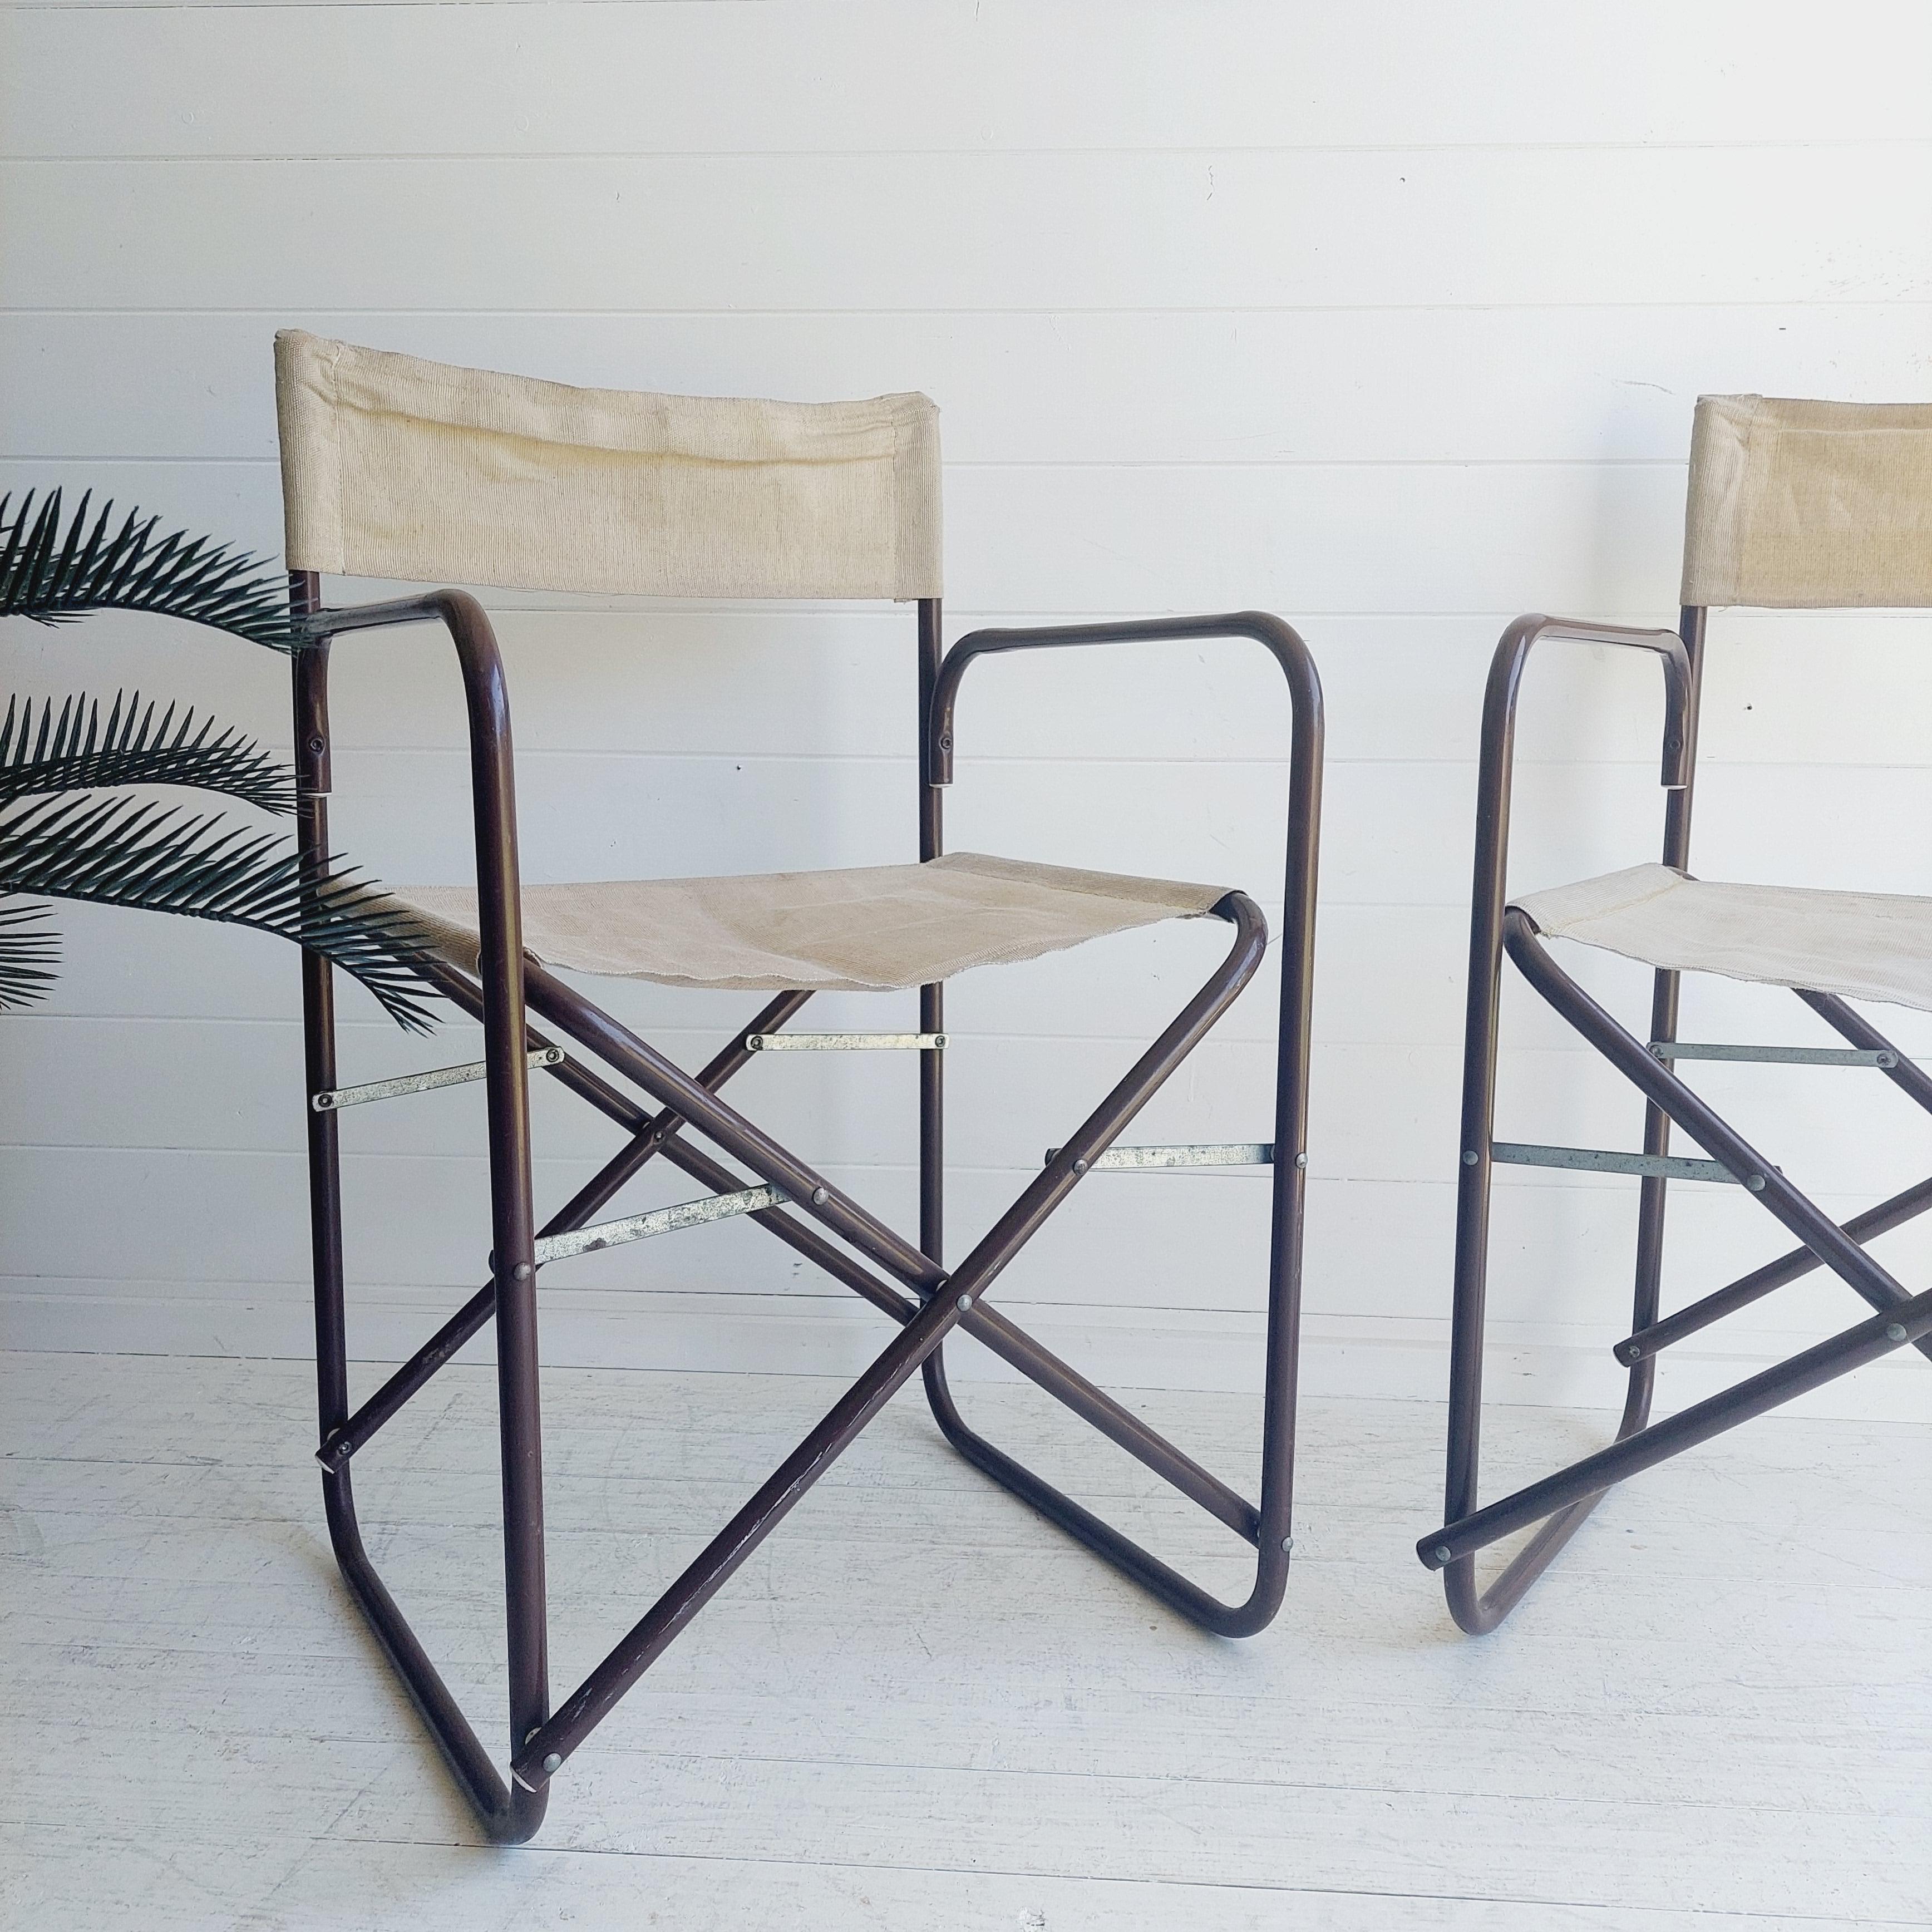 Handsome set of 2 folding Campaign style director’s chairs.
Mid century mordern design

Comprised of whaterproff beige canvas sling seats and back, and brown tubular metal frame.
Folds easily for storage. 
These are done in the style of Gae